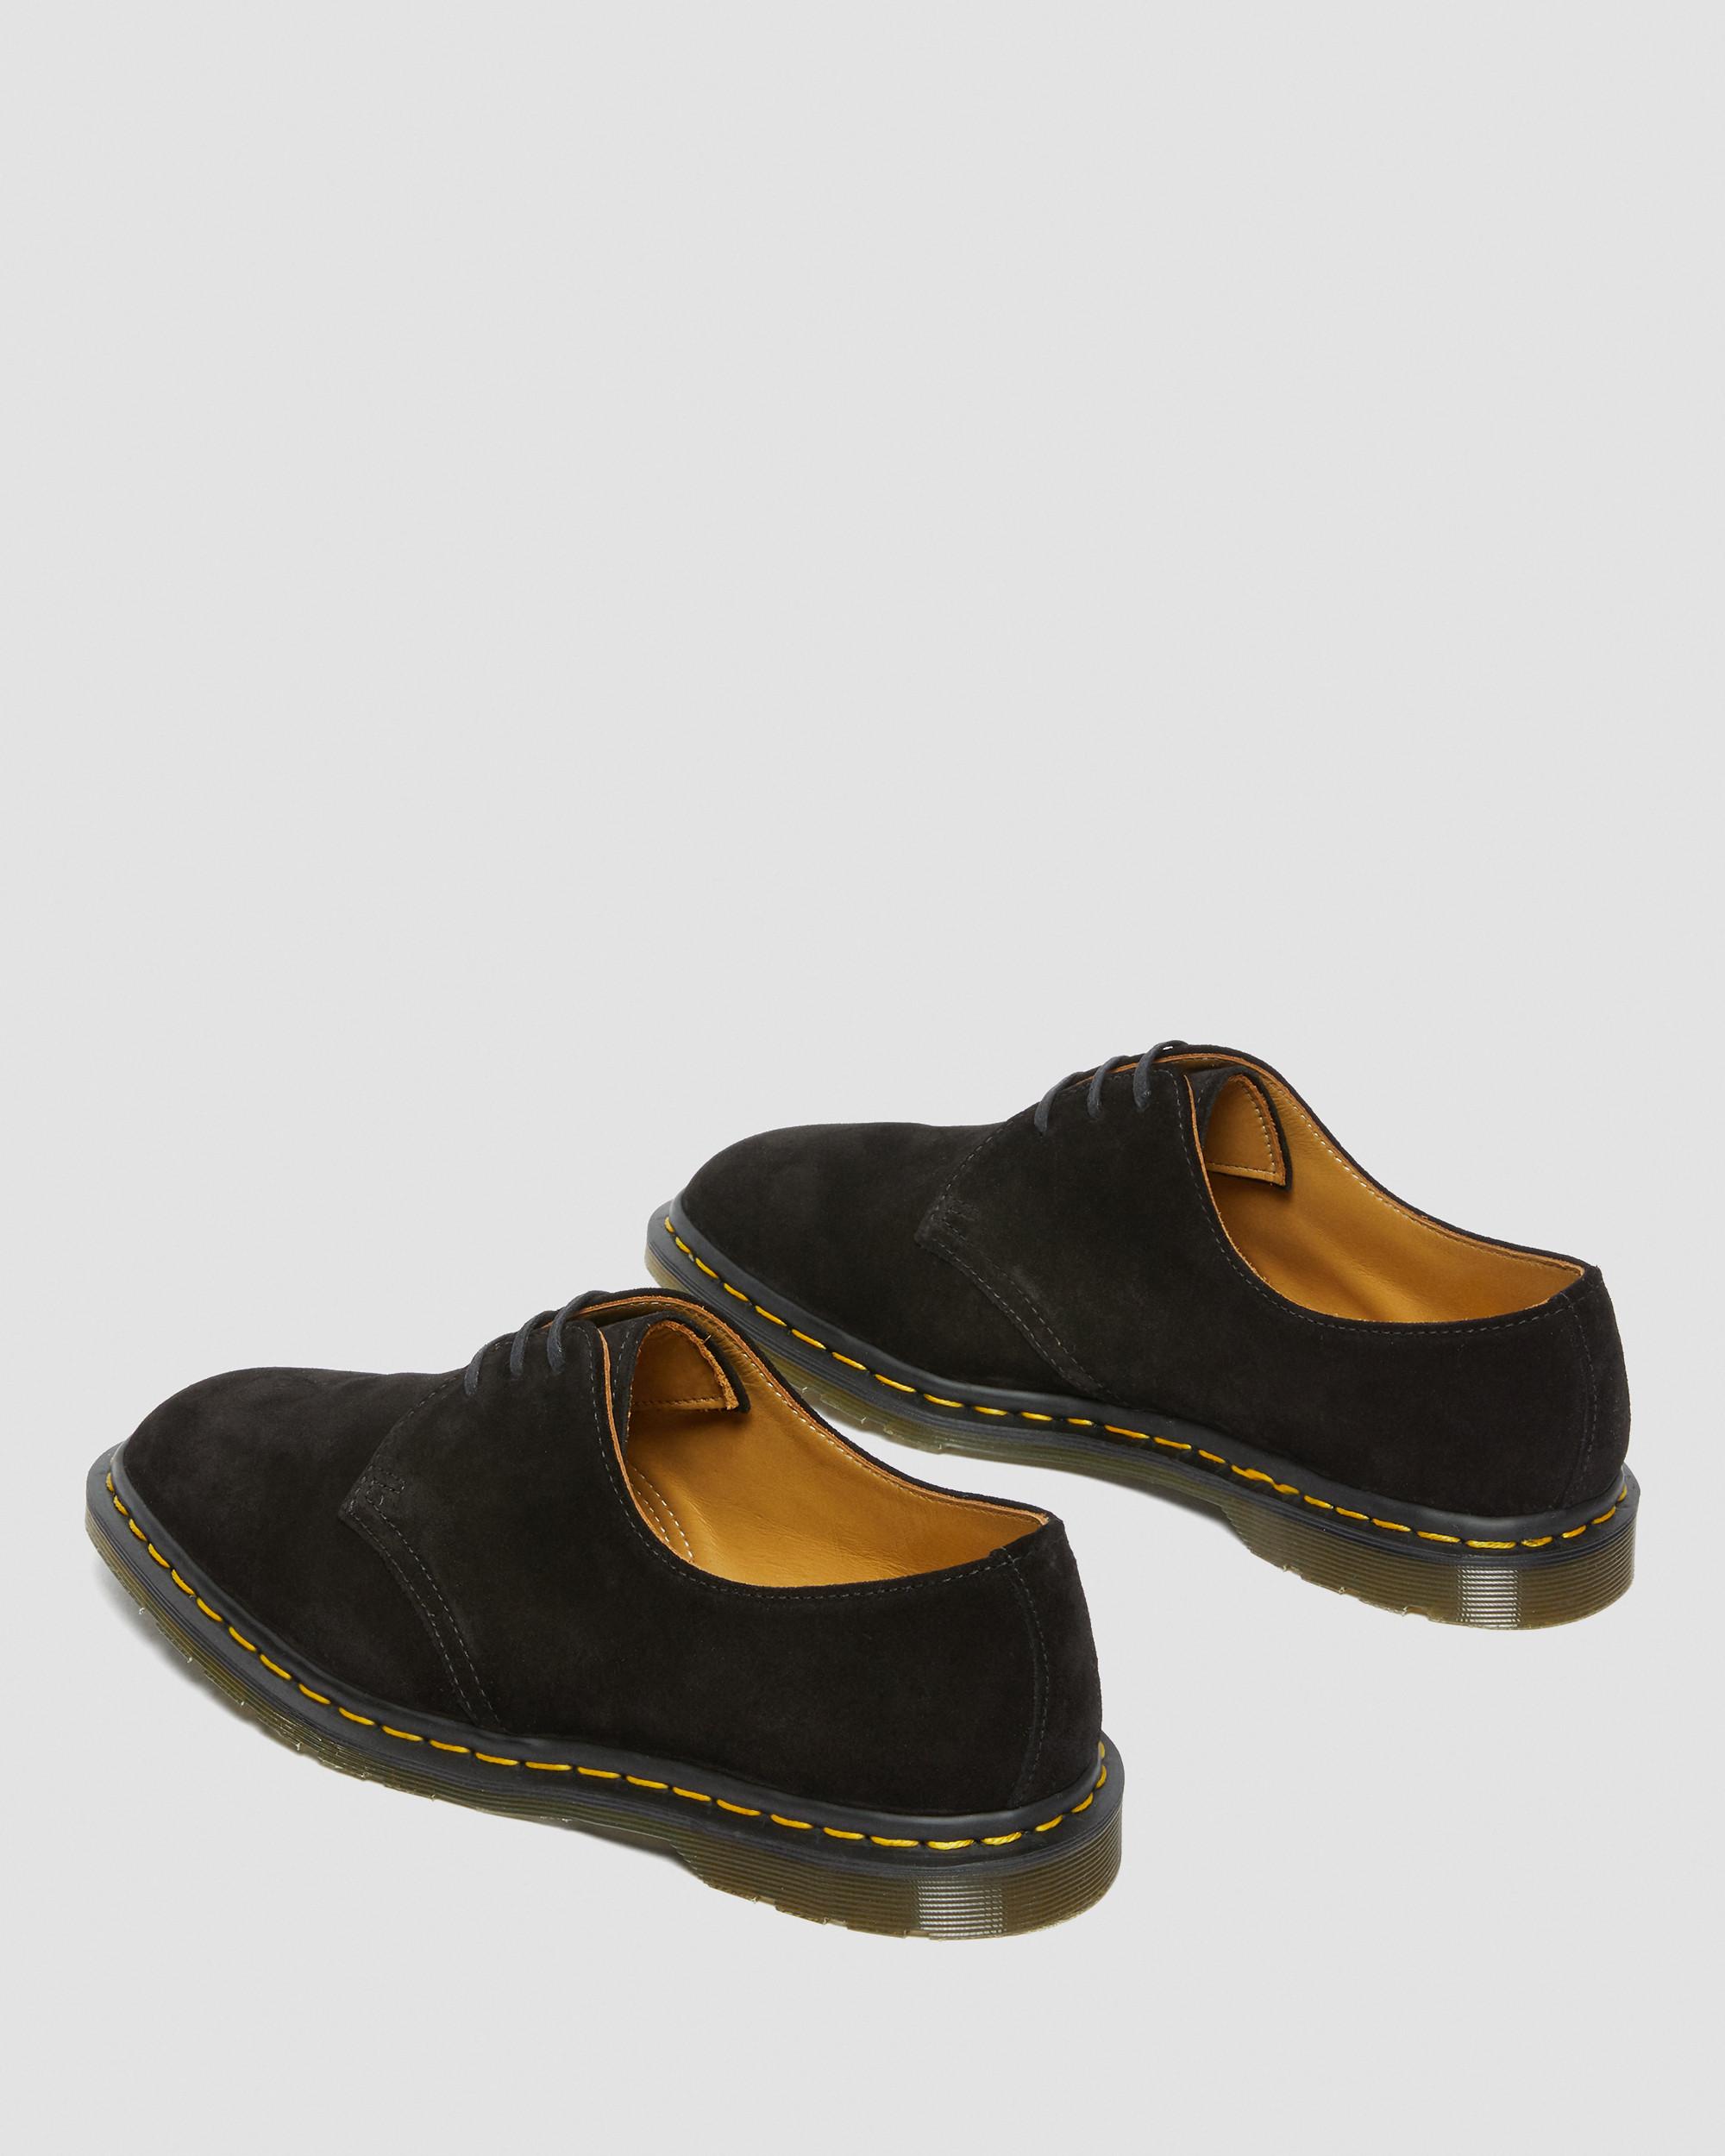 II Made England Suede Oxford Shoes | Dr. Martens